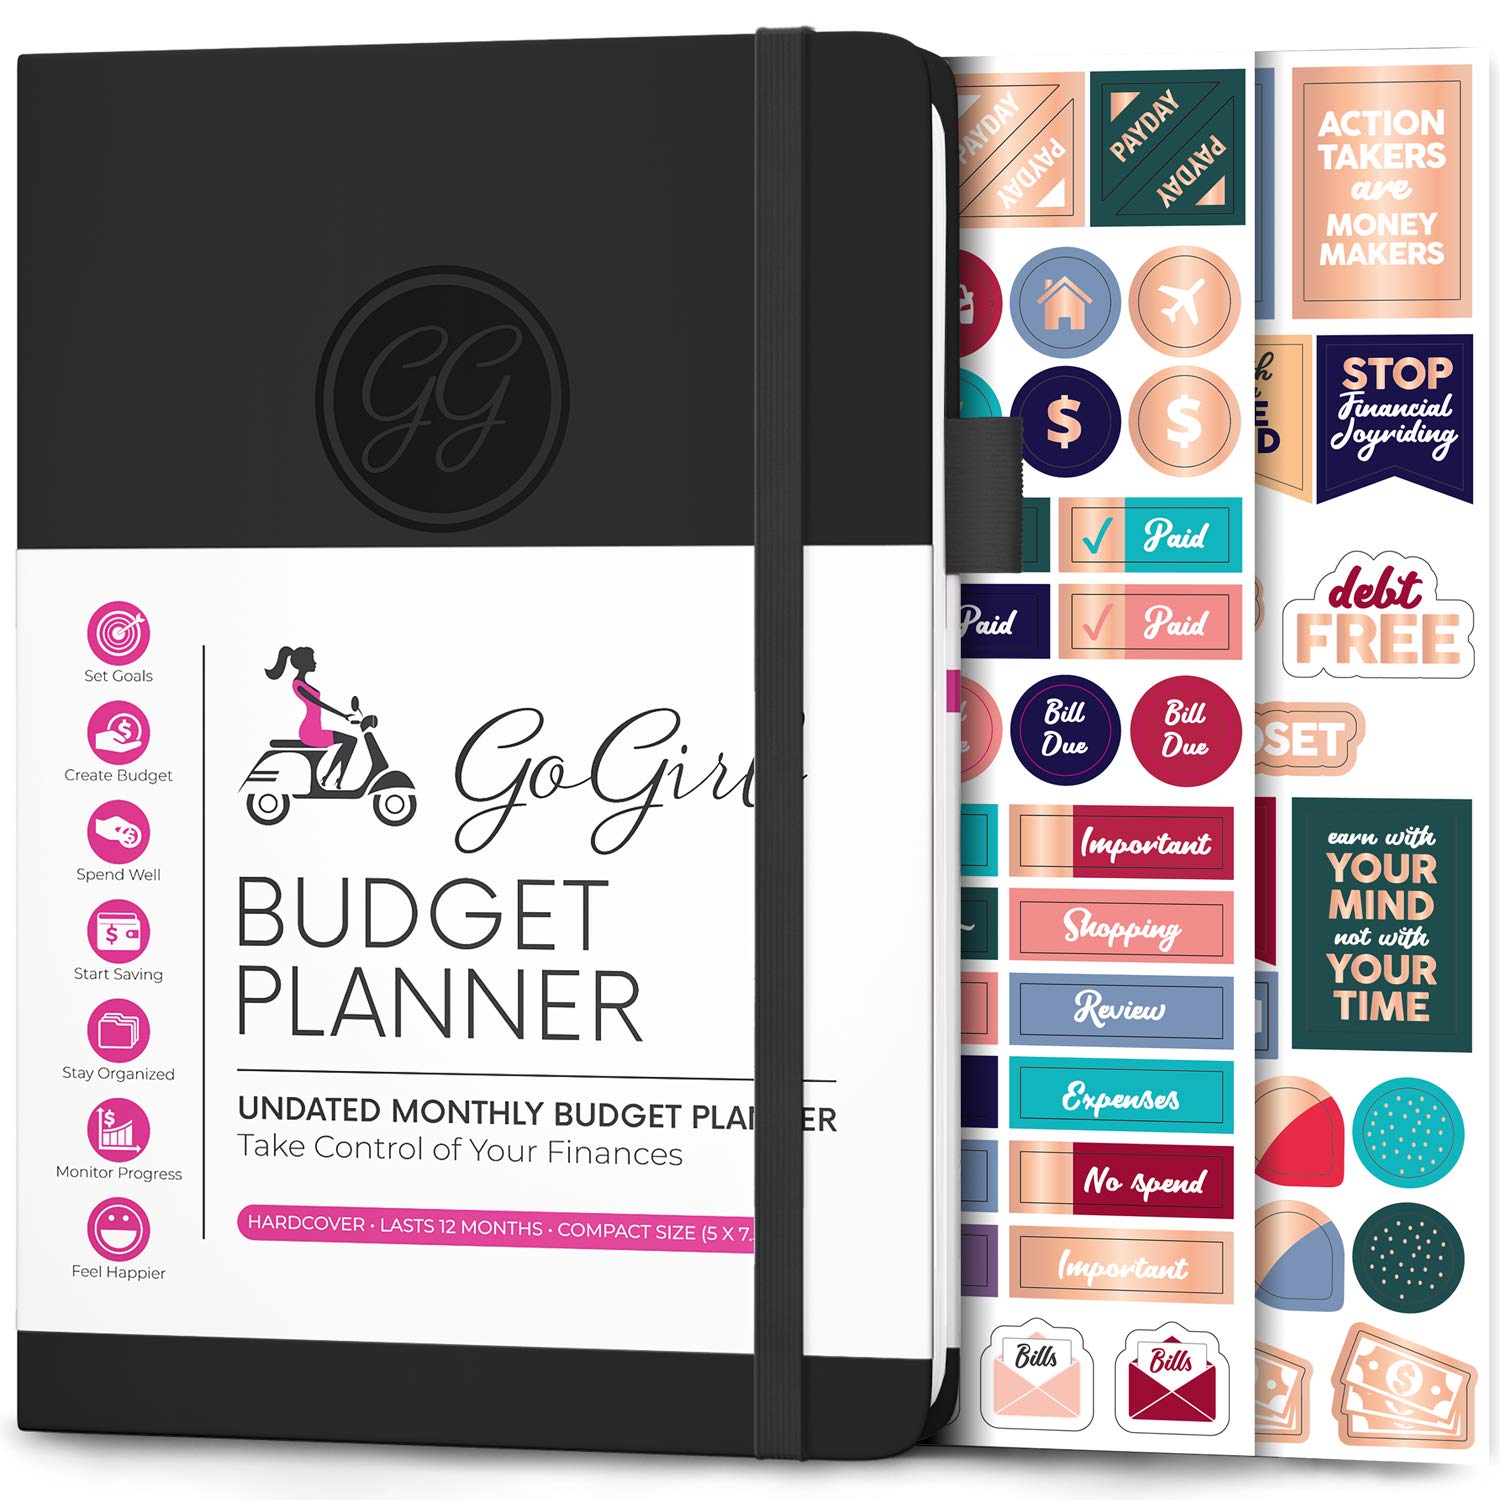 Gogirl Budget Planner And Monthly Bill Organizer - Financial Planner Organizer Budget Book Bill Book To Control Your Money Undat